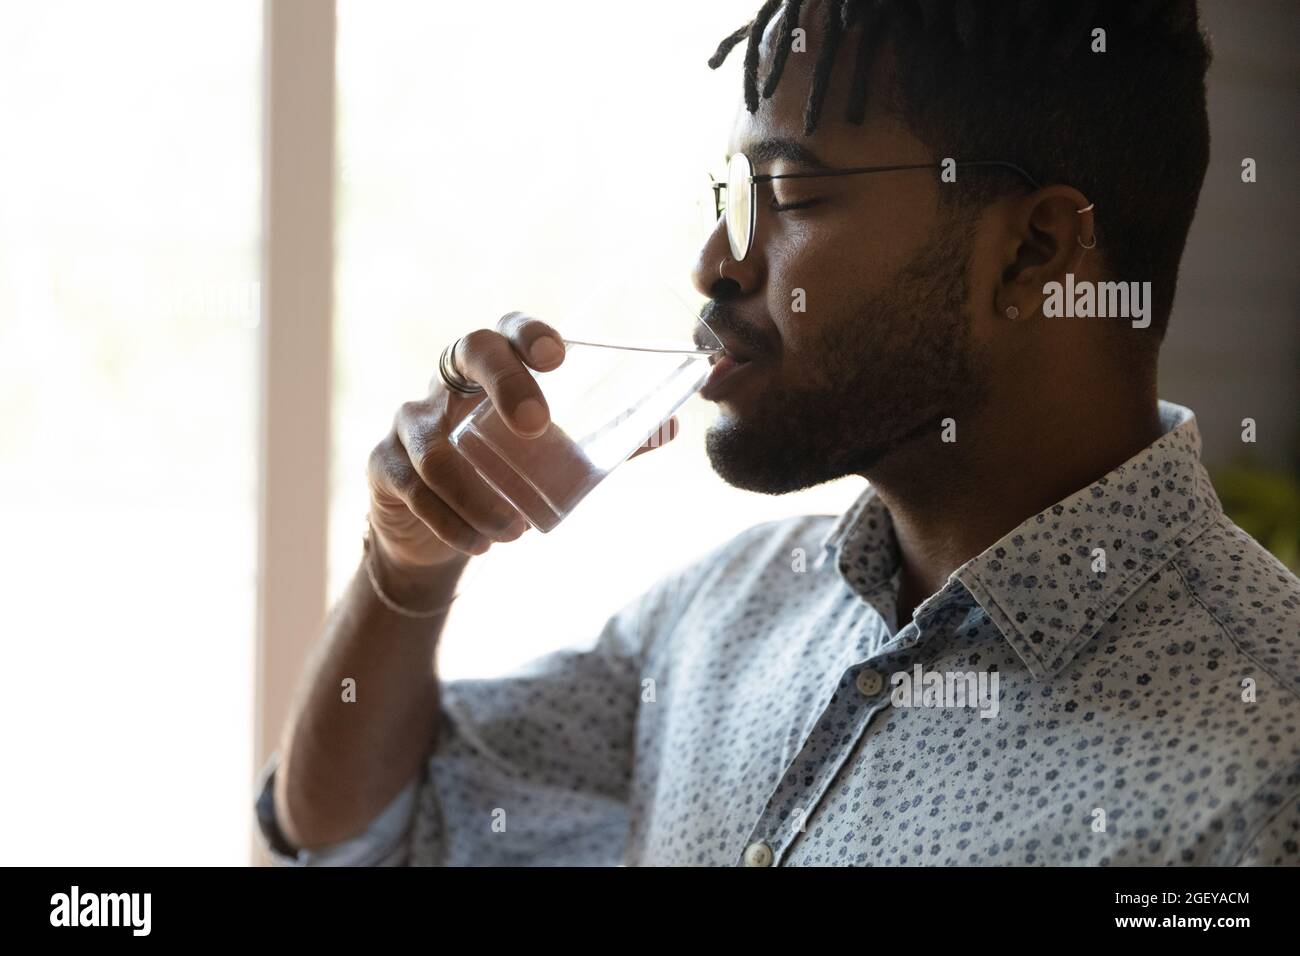 Peaceful millennial Afro American guy drinking water with closed eyes Stock Photo